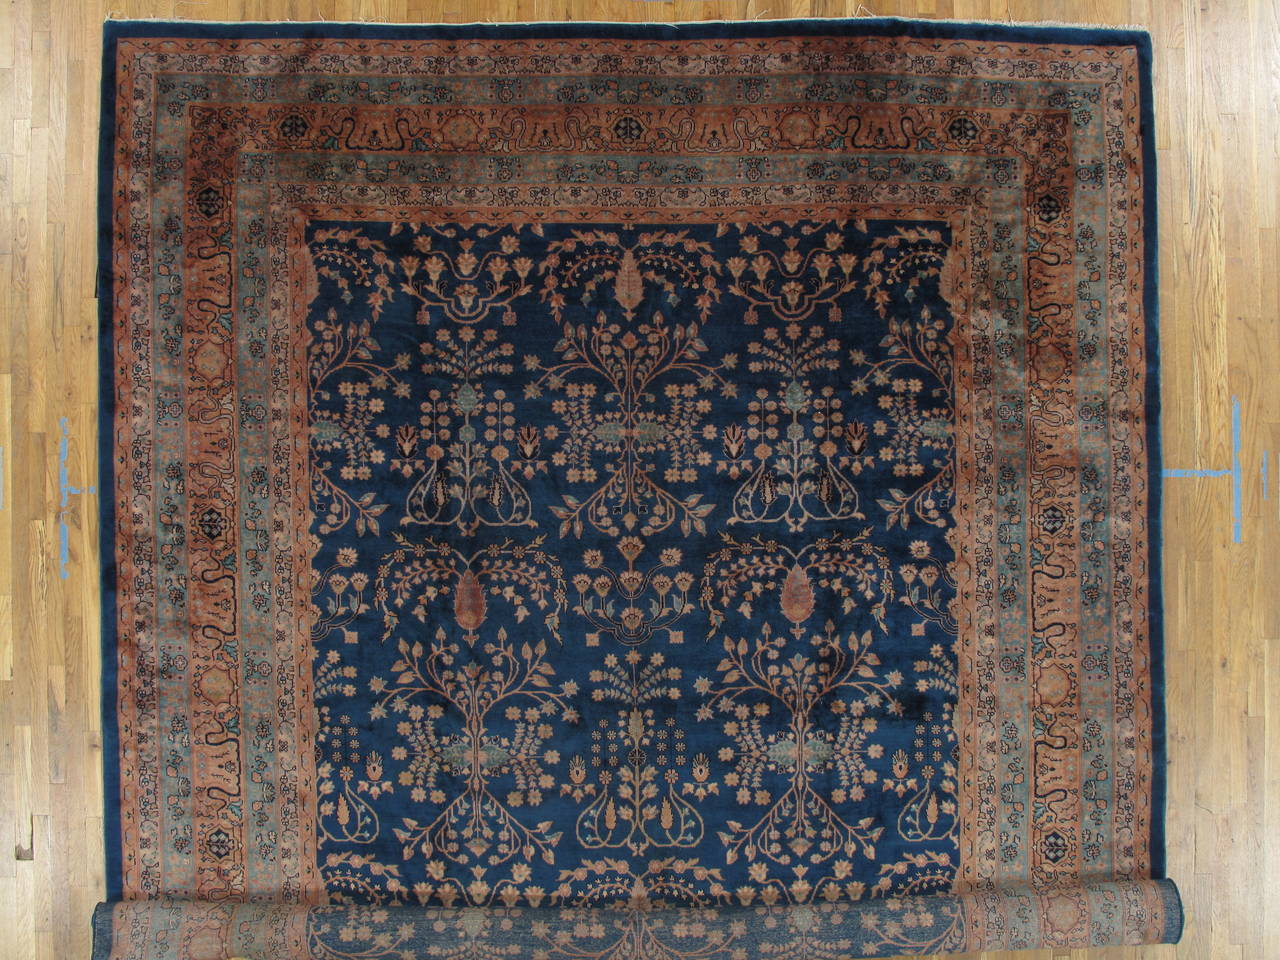 Hand-Knotted Antique Indian Agra Carpet, Handmade Oriental Rug, Blue, Gold, Ivory, Allover